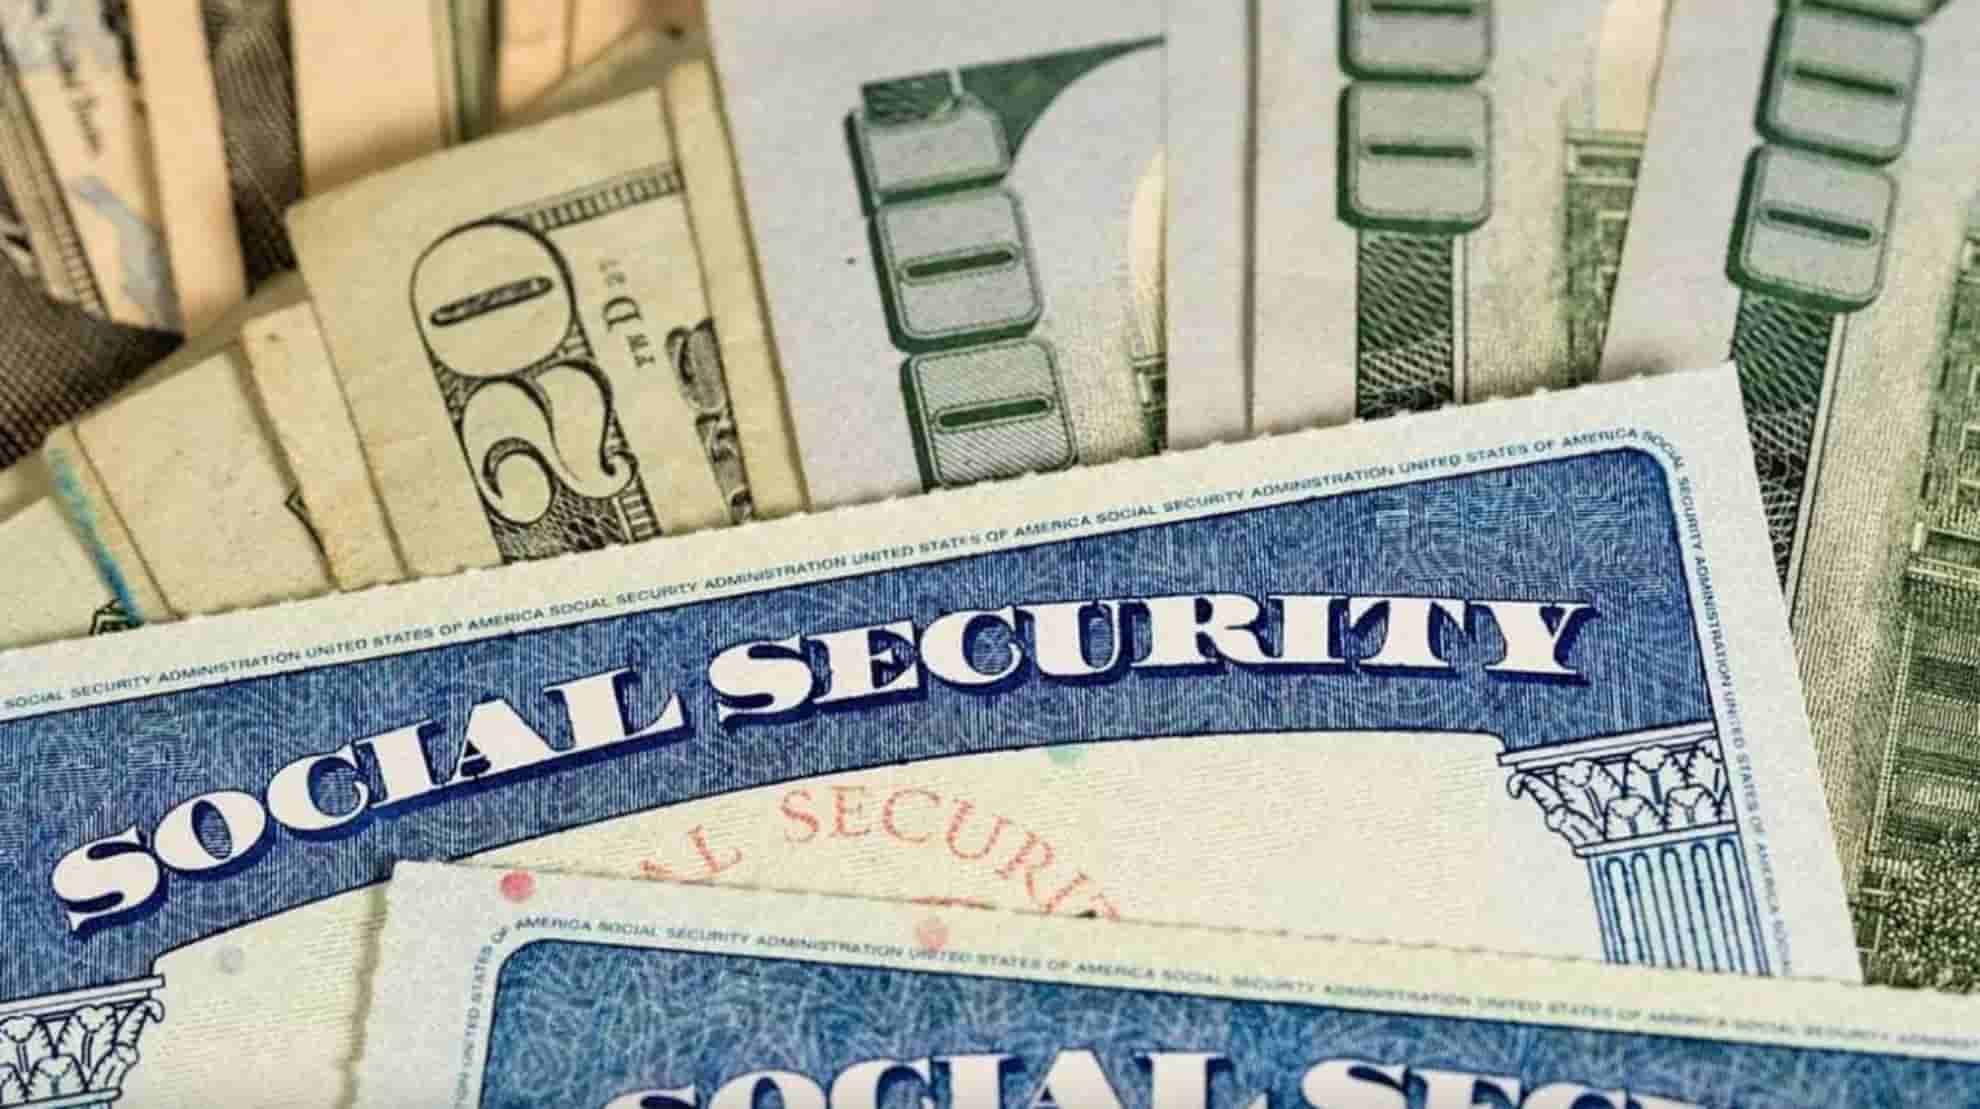 COLA 2023: projection of the increase in the Social Security check for 2023